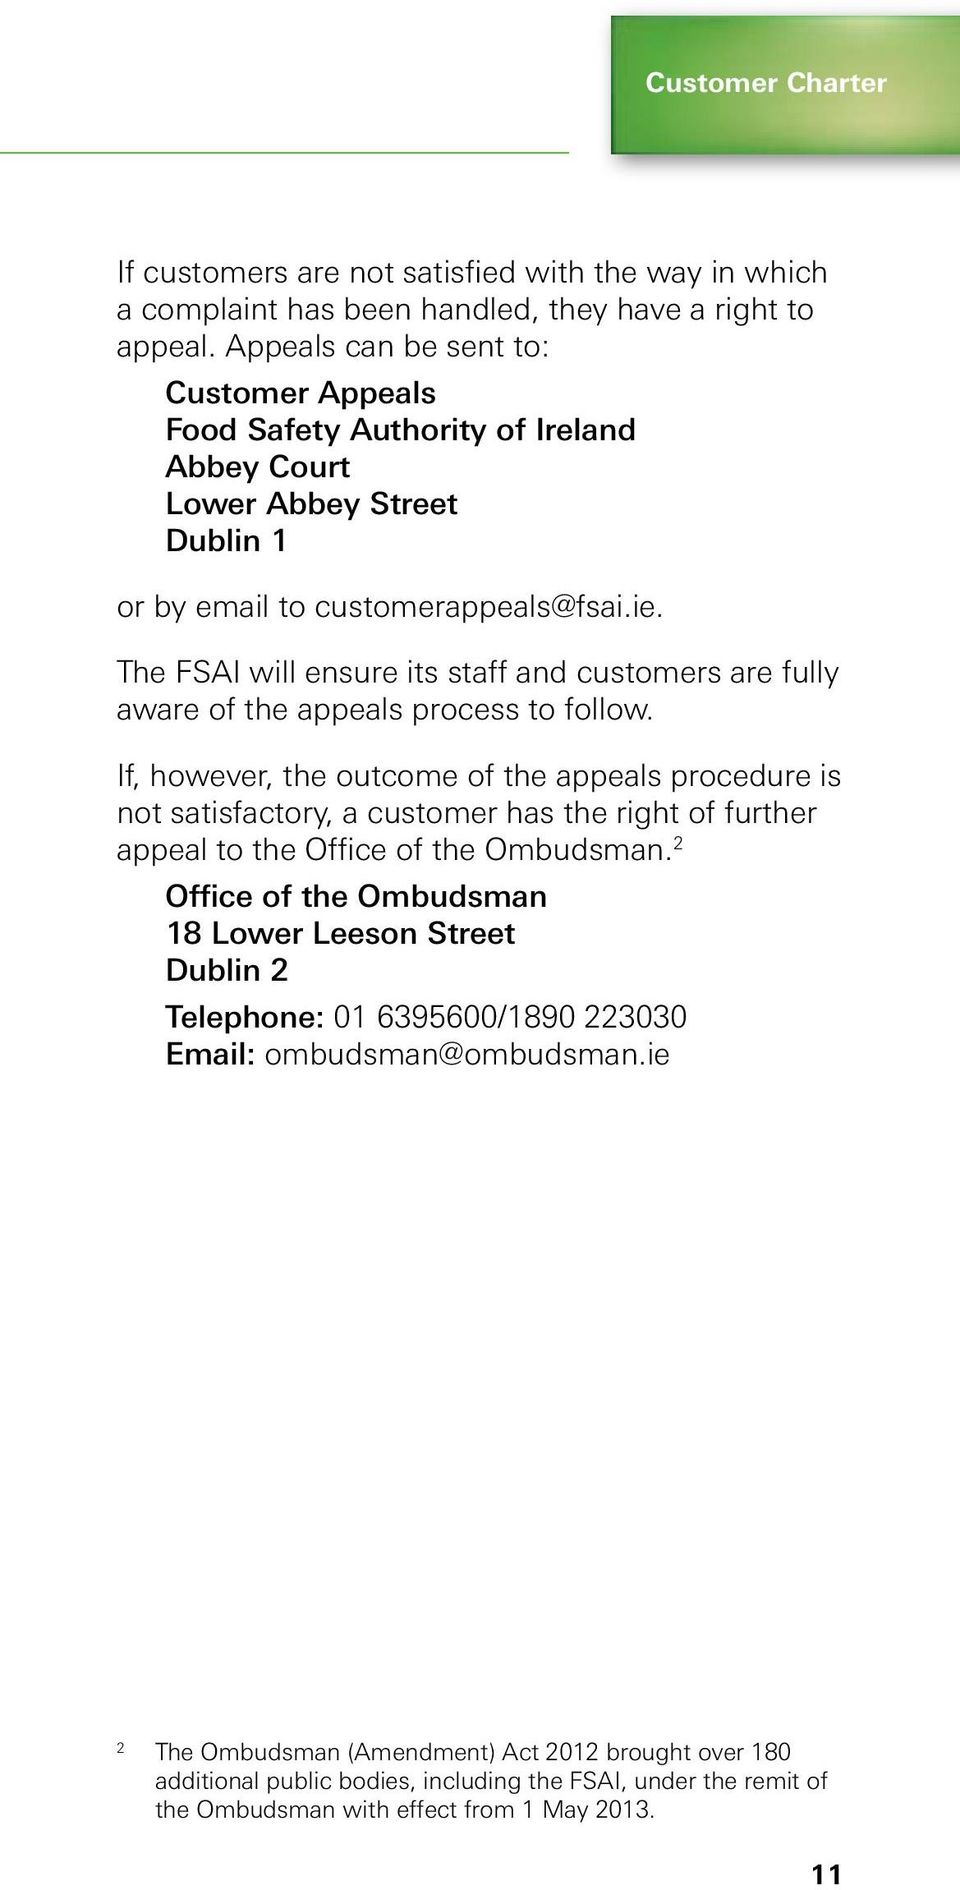 The FSAI will ensure its staff and customers are fully aware of the appeals process to follow.